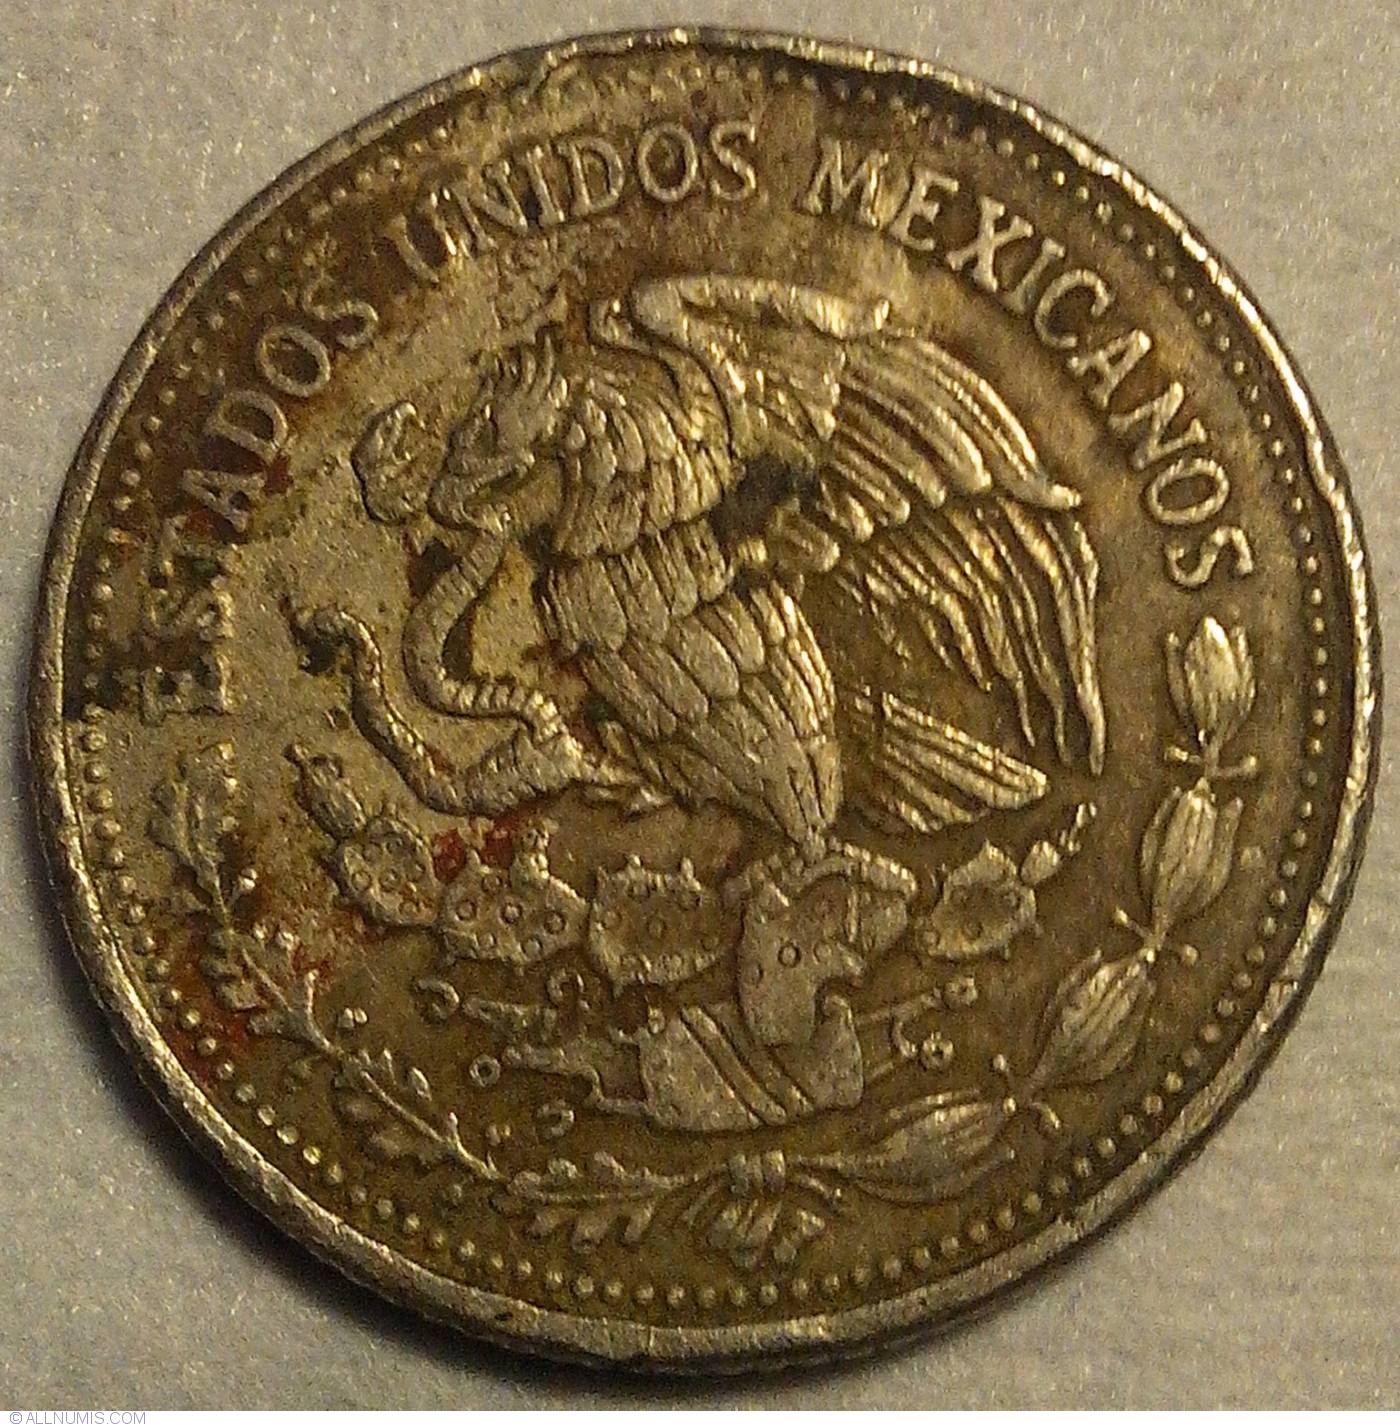 500 Pesos 1987, United Mexican States (1981-1990) - Mexico - Coin - 30683